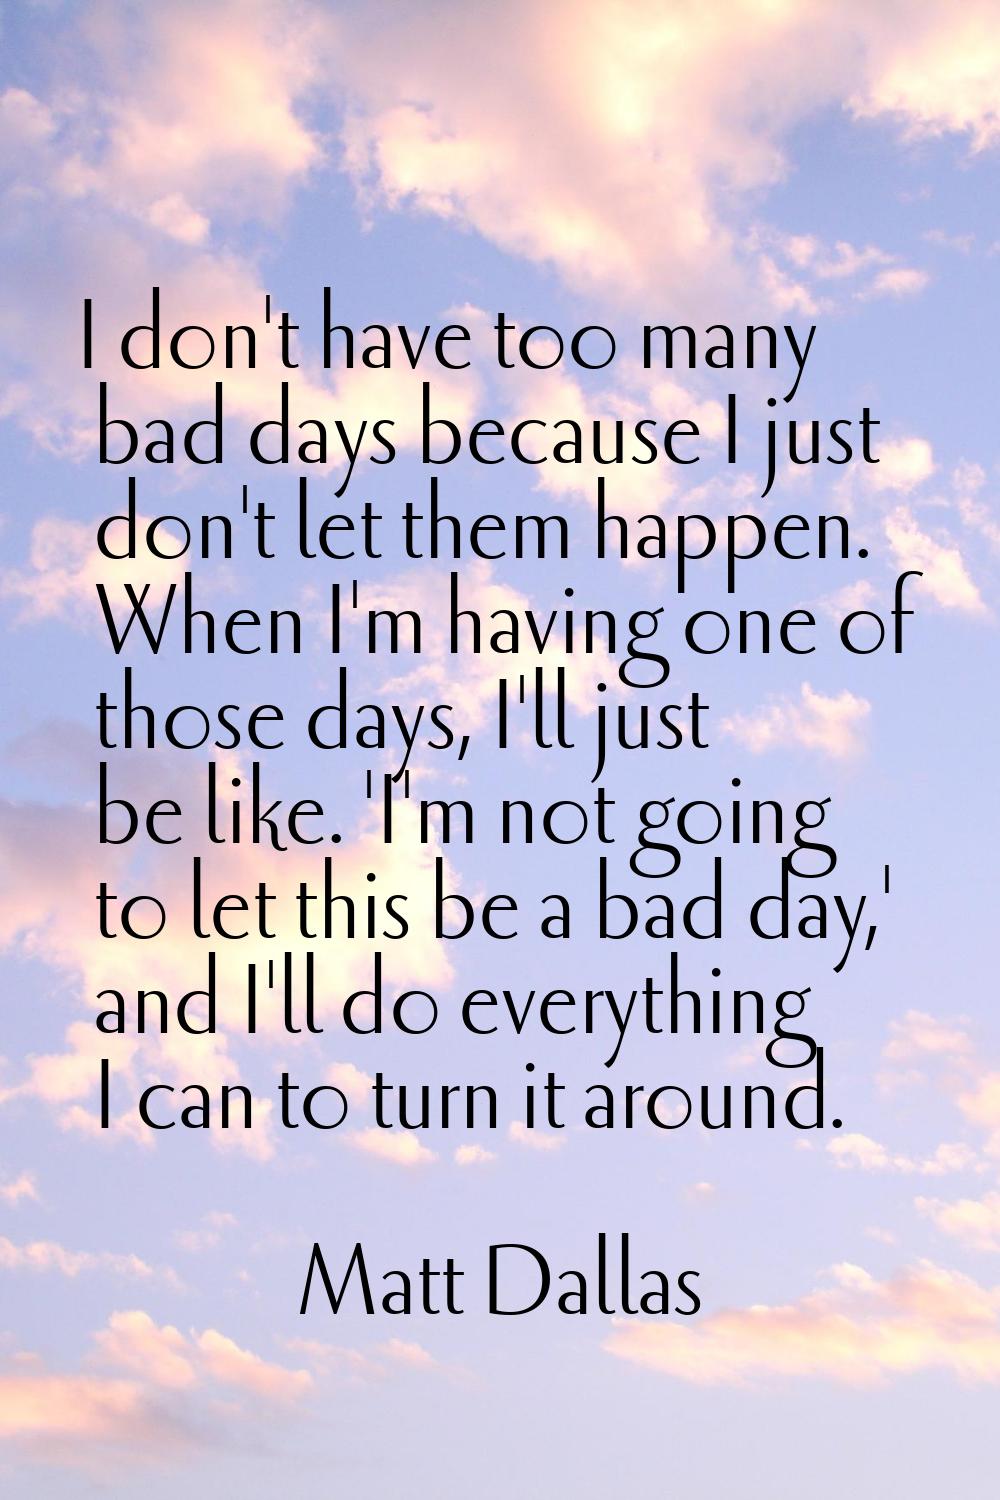 I don't have too many bad days because I just don't let them happen. When I'm having one of those d